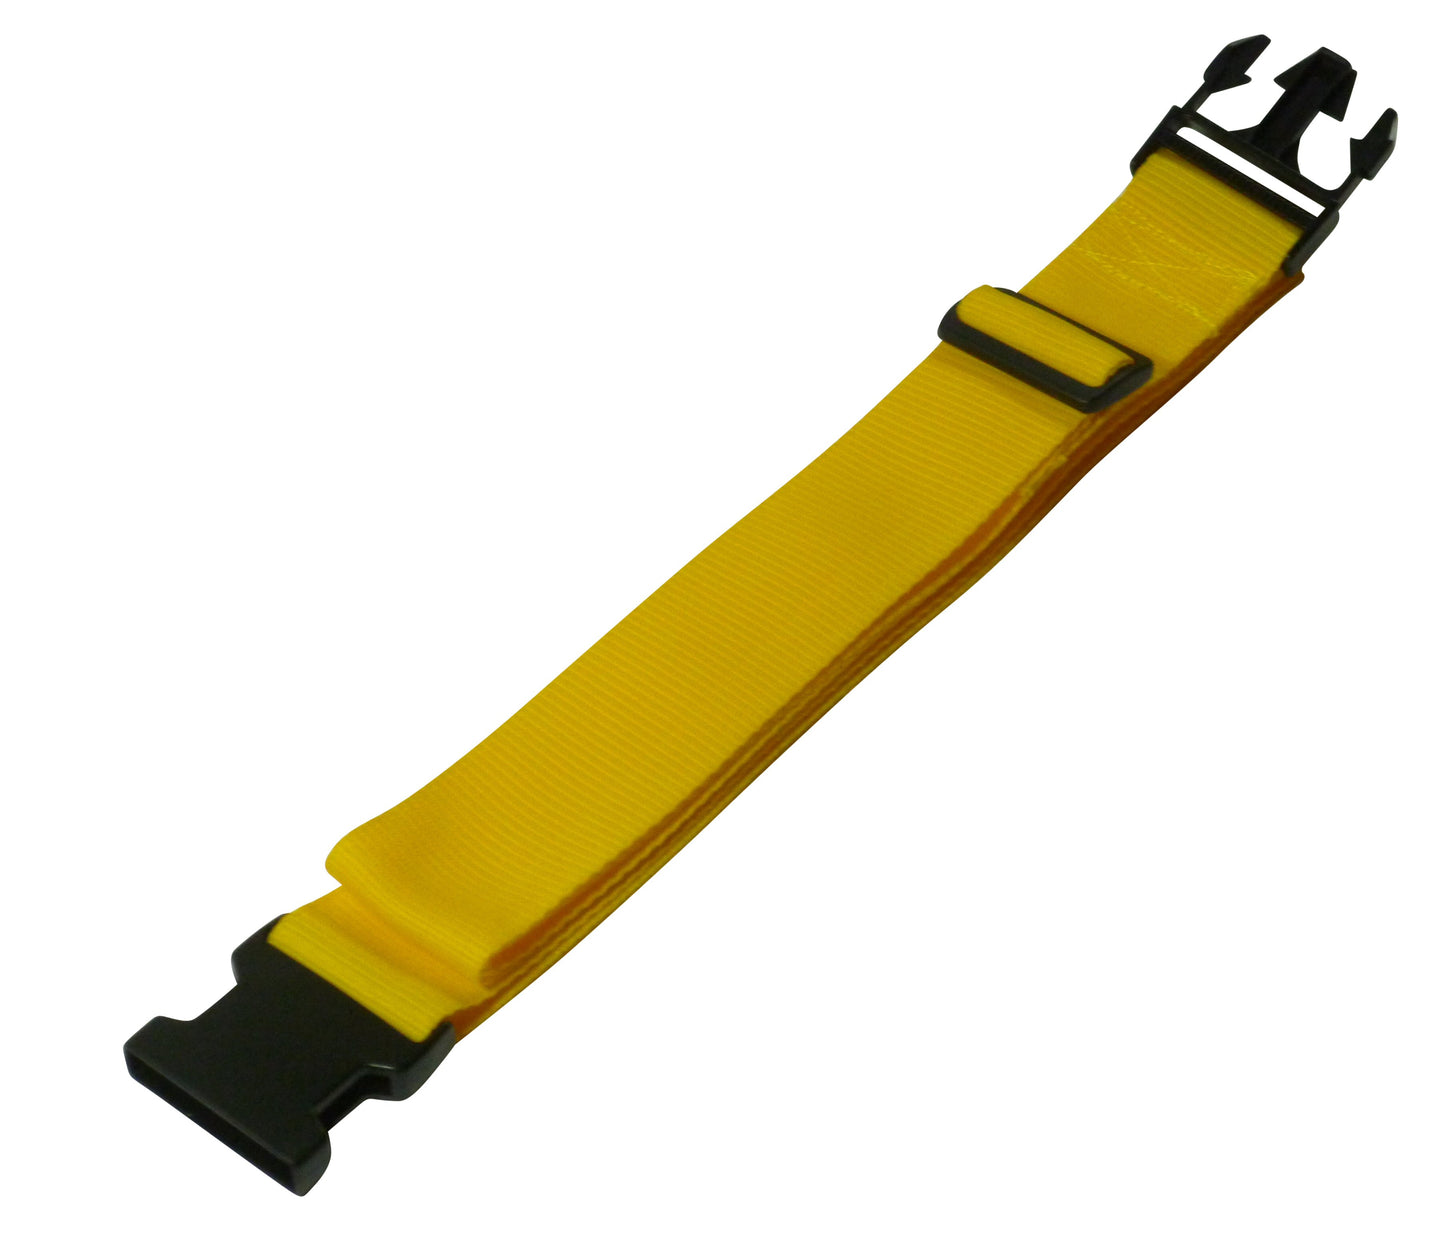 Benristraps 50mm Webbing Strap with Quick Release & Length-Adjusting Buckles in yellow